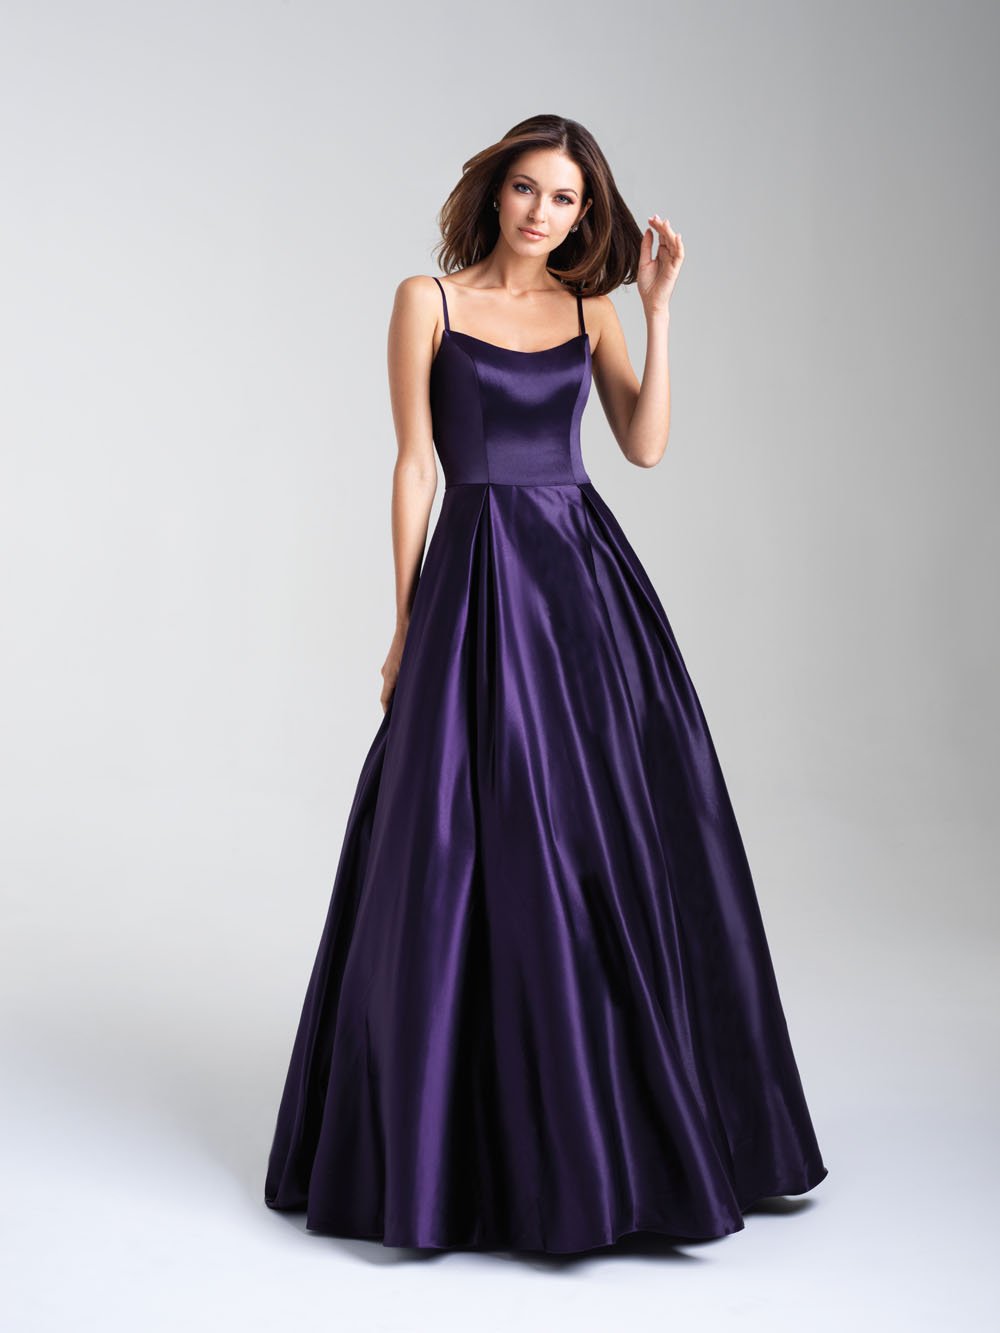 Madison James 20-314 dress images in these colors: Blush, Dark Purple, Peacock.